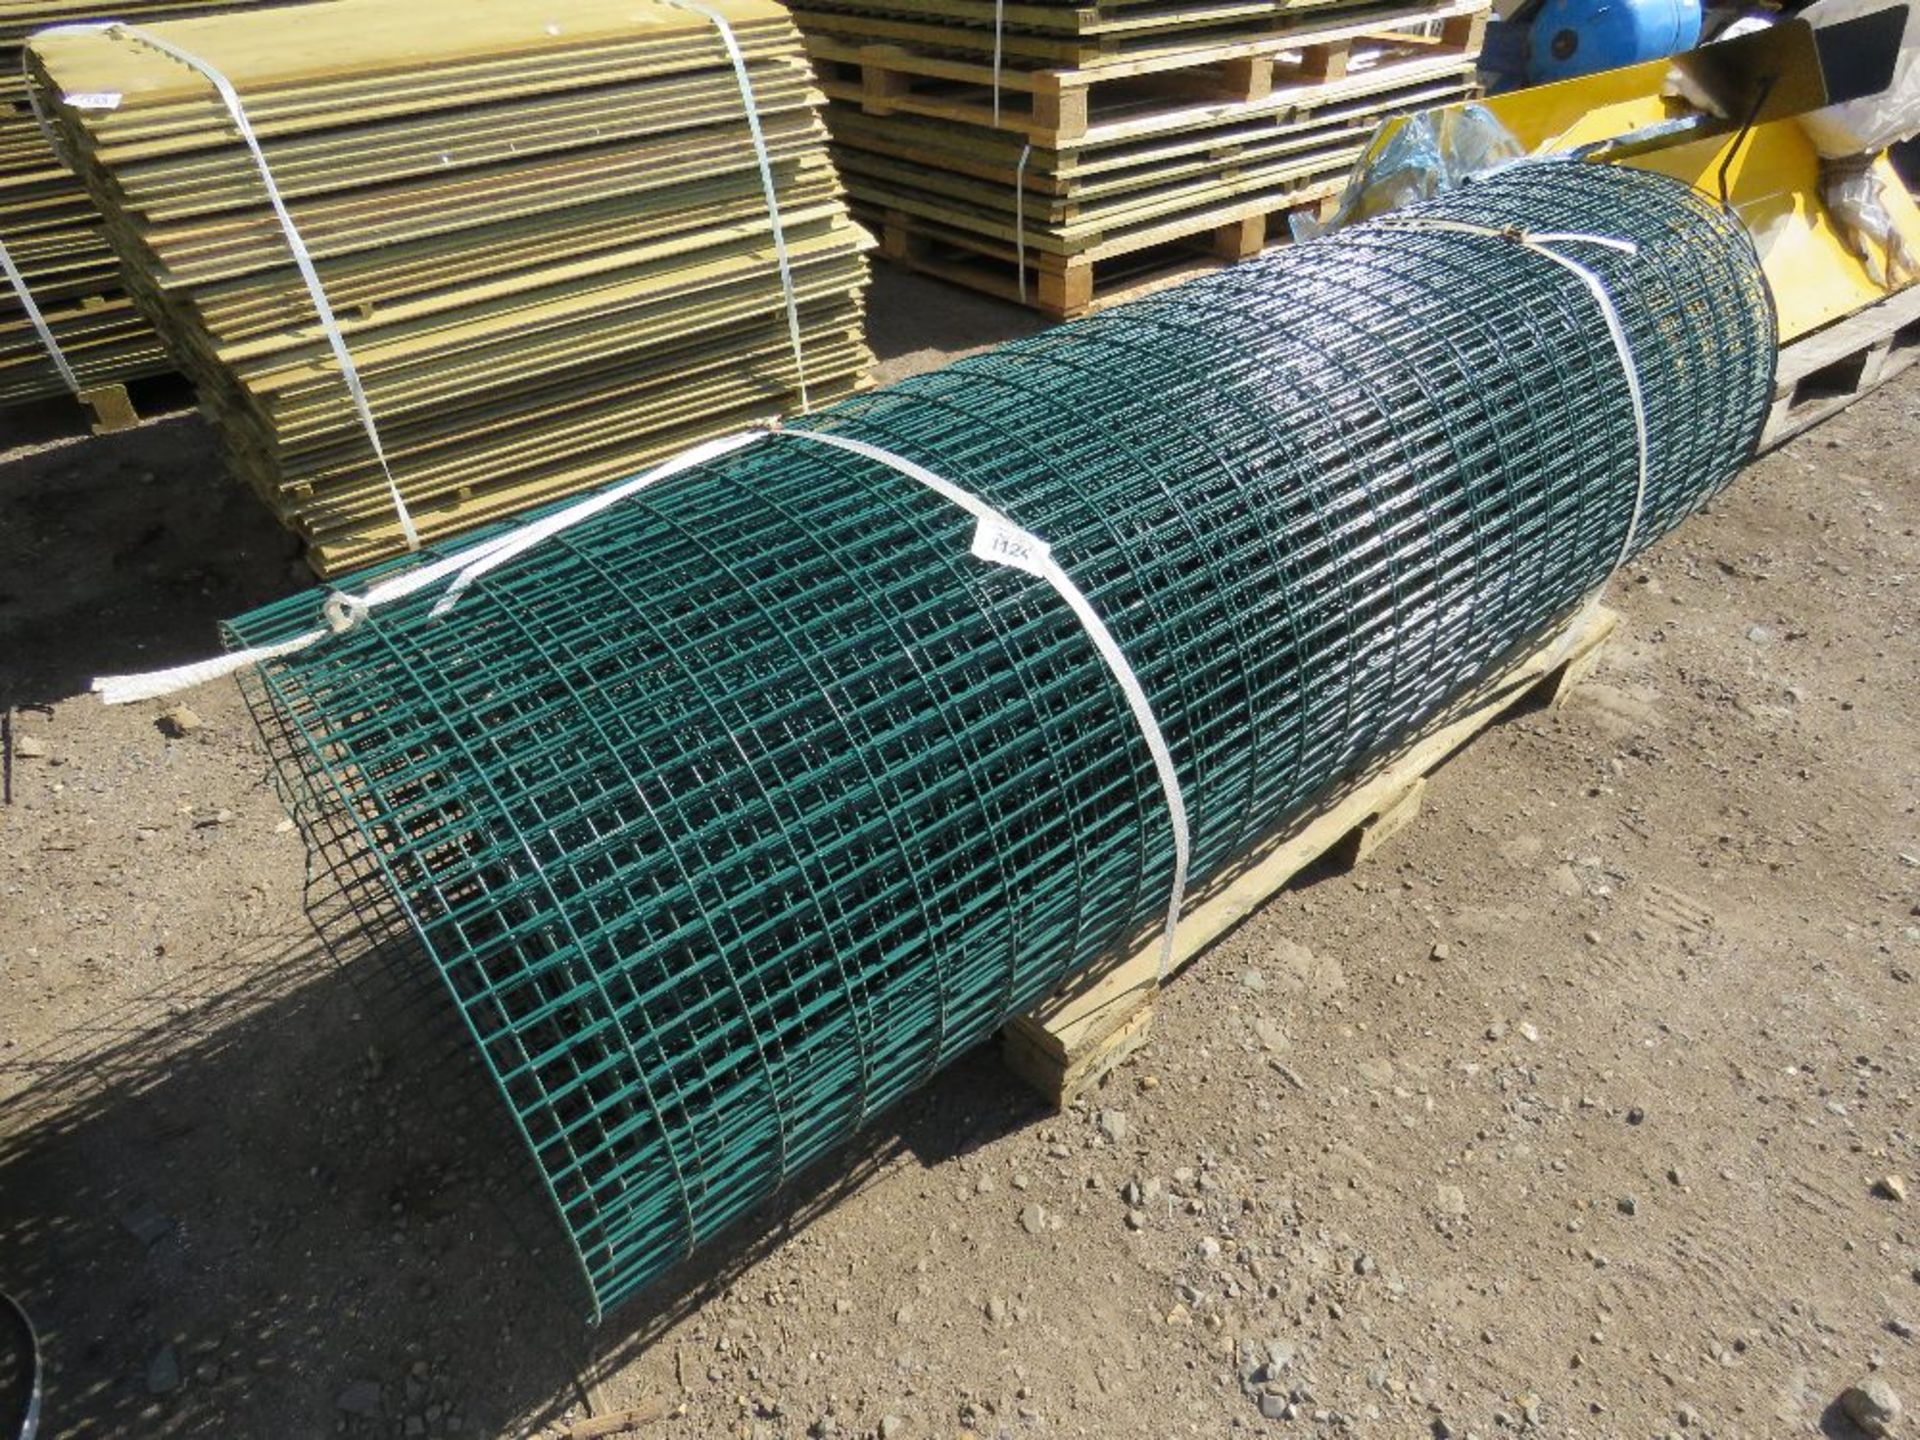 ROLL OF GREEN WIRE FENCE NETTING. 5FT6" APPROX.